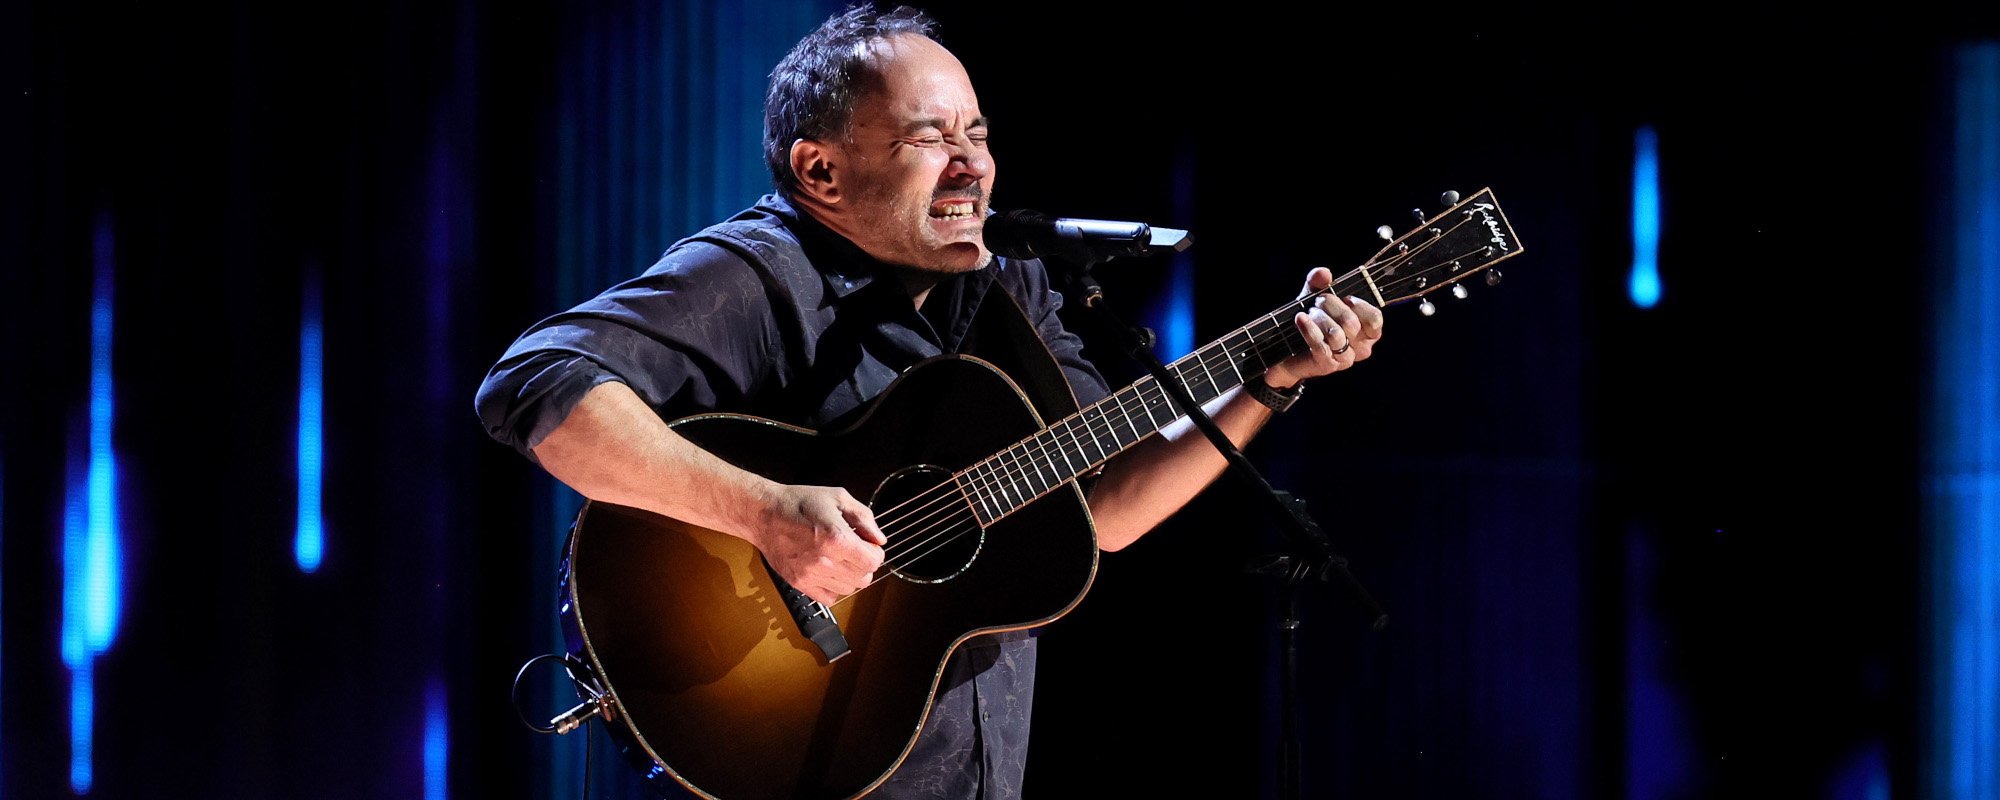 3 Acoustic Dave Matthews Concerts Every Fan Should See